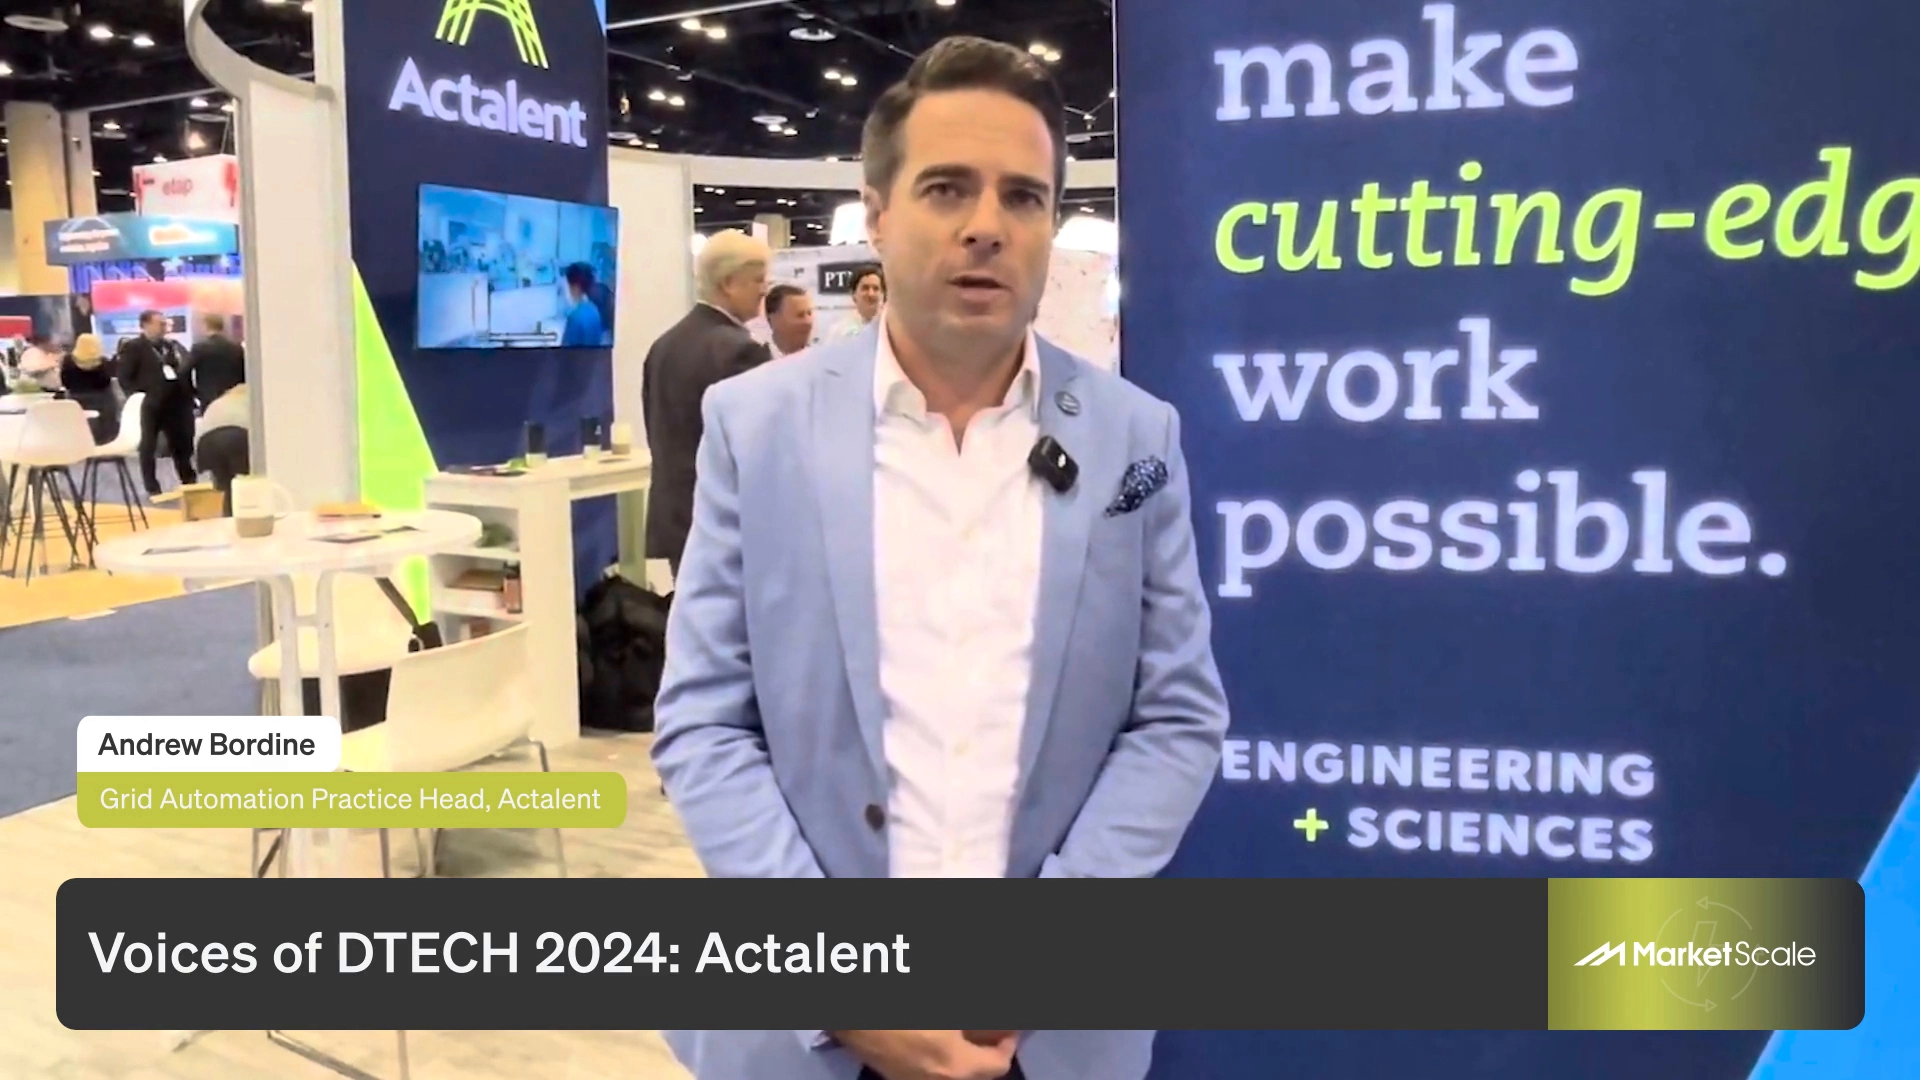 DTECH 2024: To Propel the Digitization of the Grid, Seek Out Expert Partners for Solutions